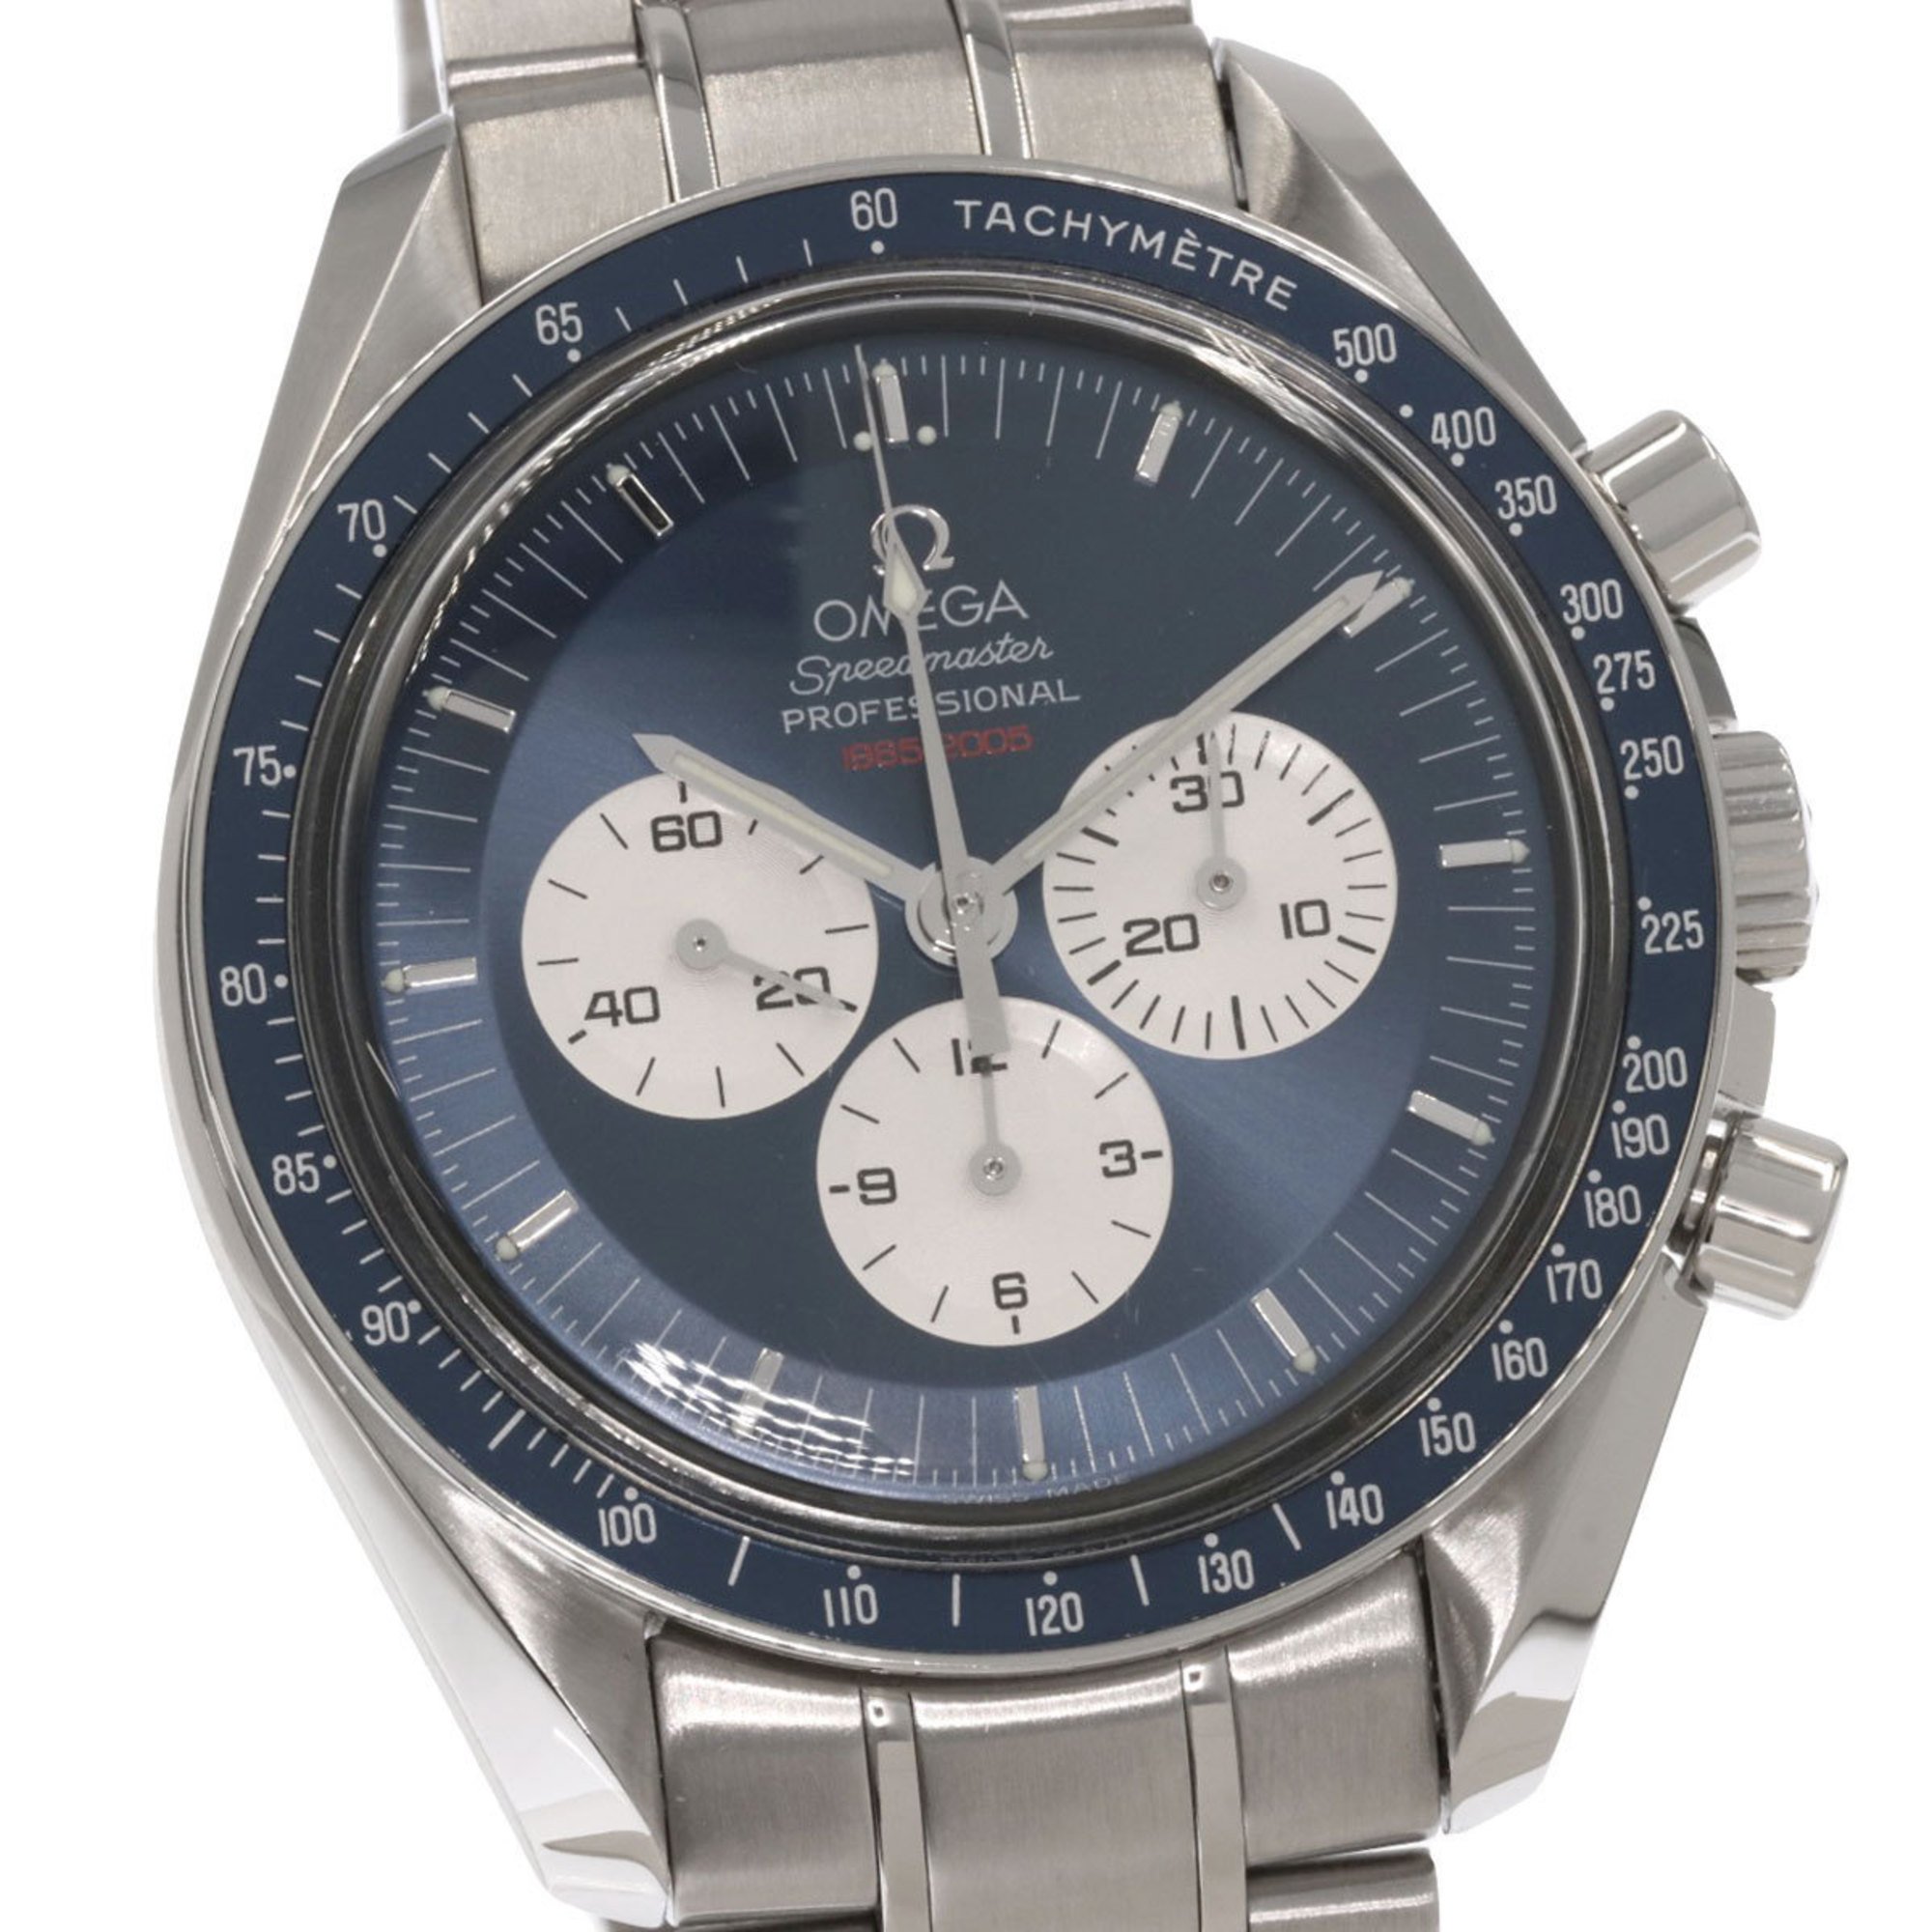 Omega 3565.8 Speedmaster Je 4 First 2005 World Limited Watch Stainless Steel SS Men's OMEGA